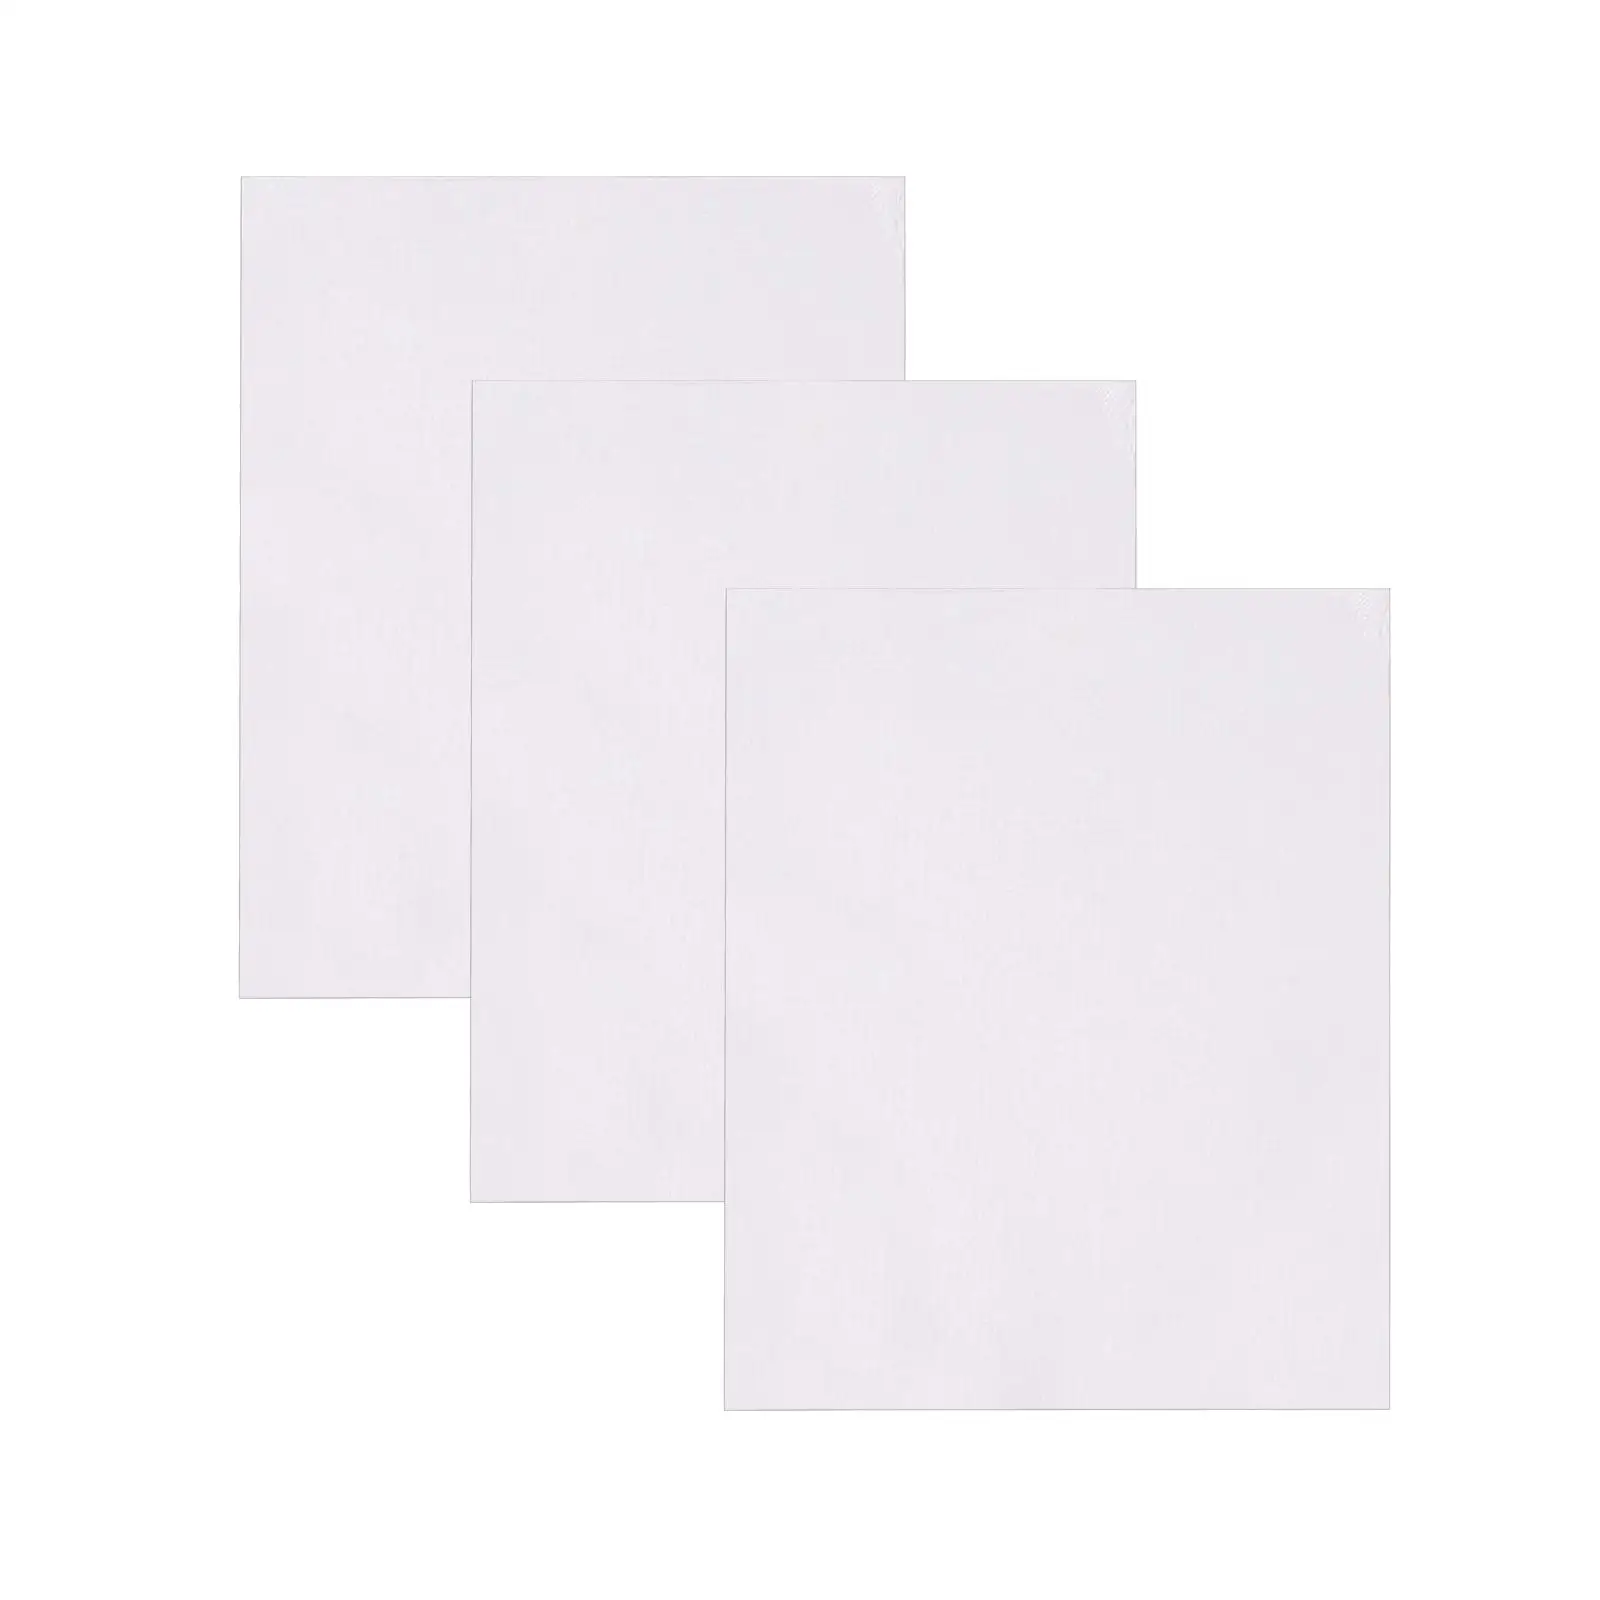 3x Canvas Panels Acrylic Oil Painting Canvas Art Boards Artist Boards Cotton Artist Blank Canvas Boards for Painter Oil Painting